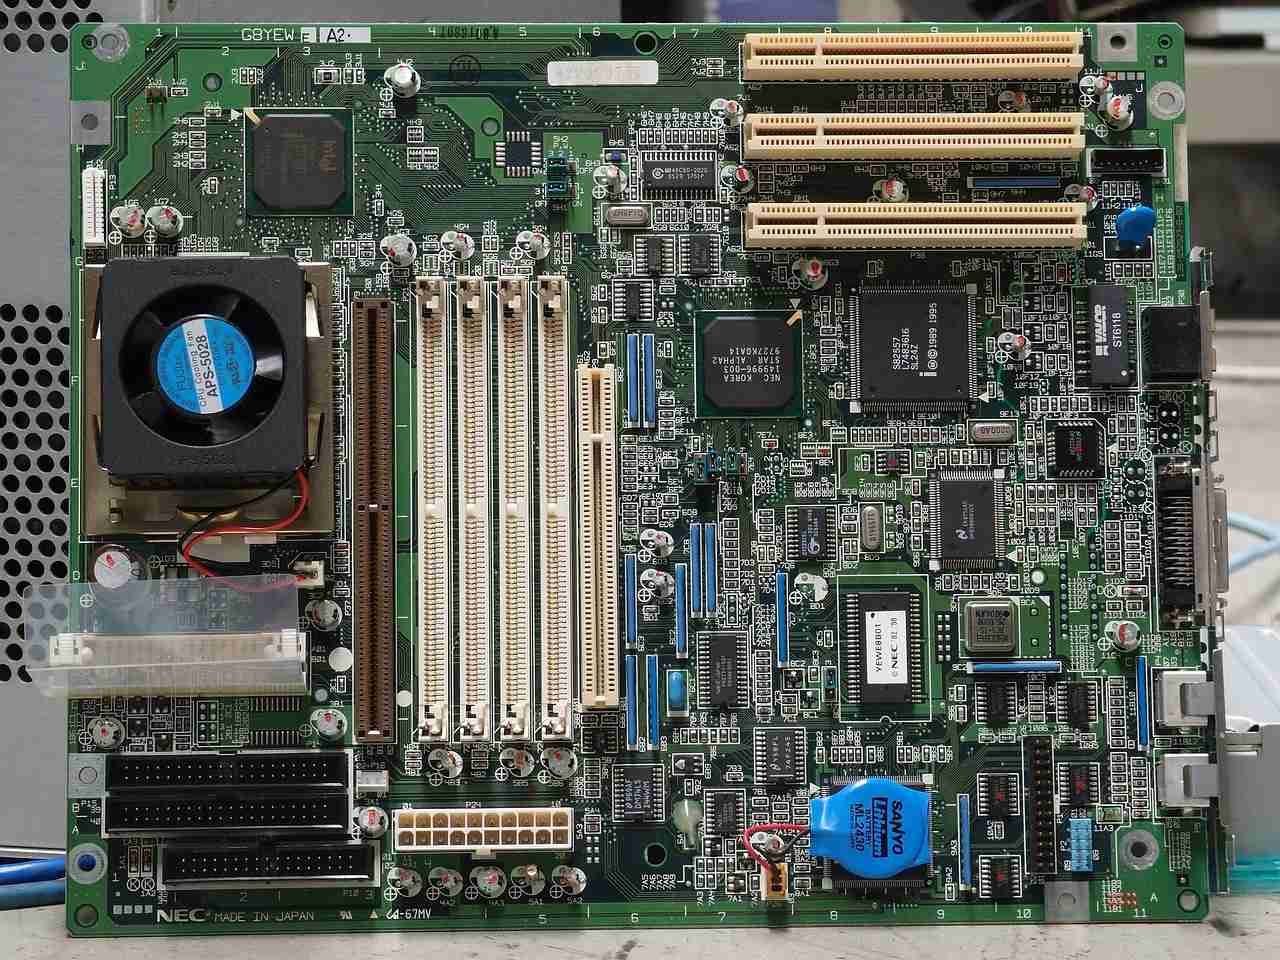 Motherboard starts but no images